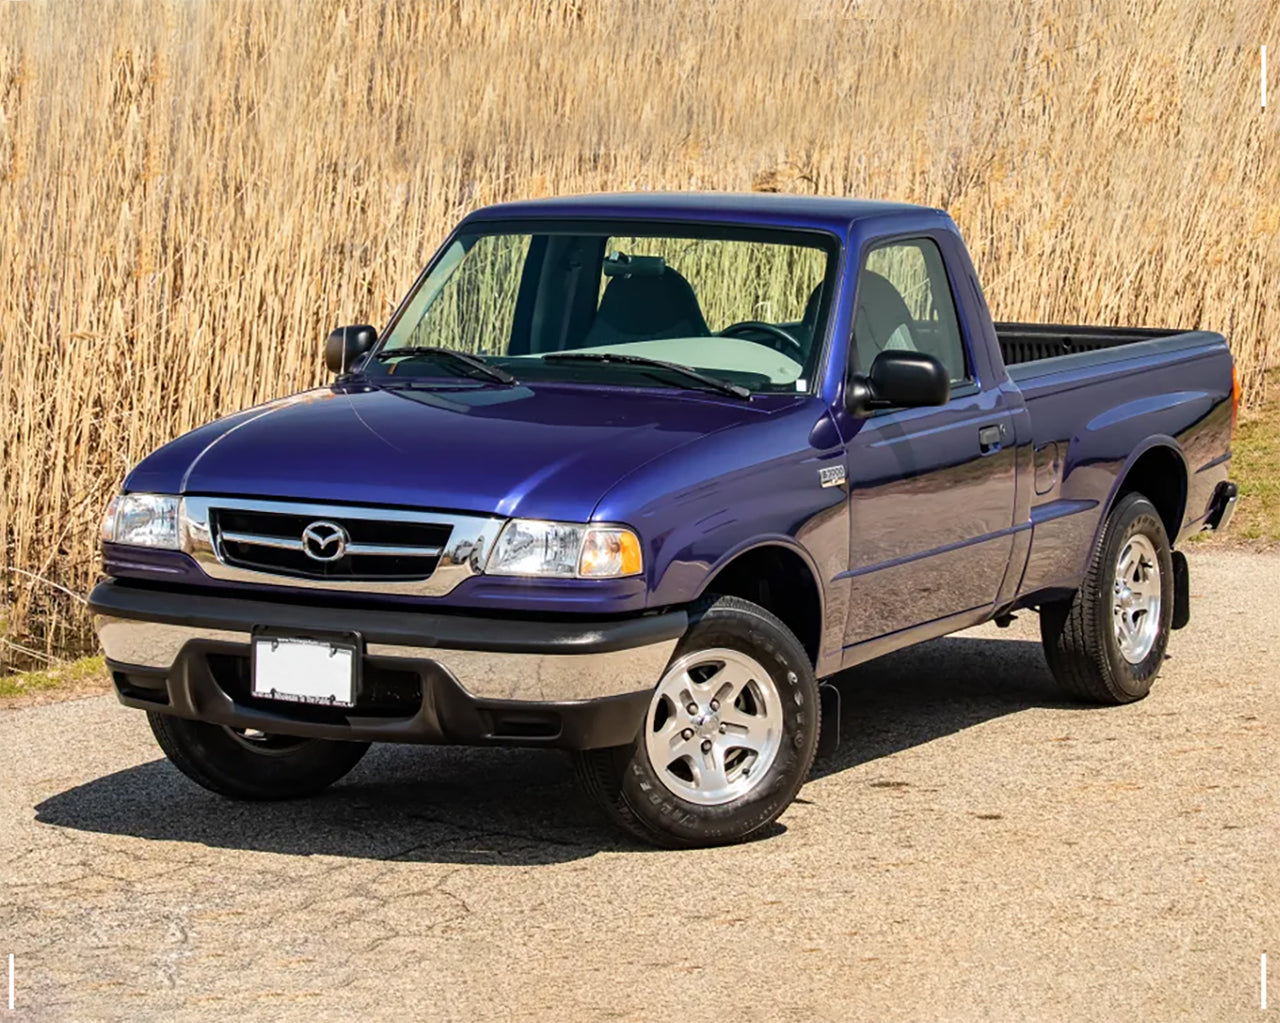 Blue Mazda B3000 pickup truck parked in front of a field of tall grass